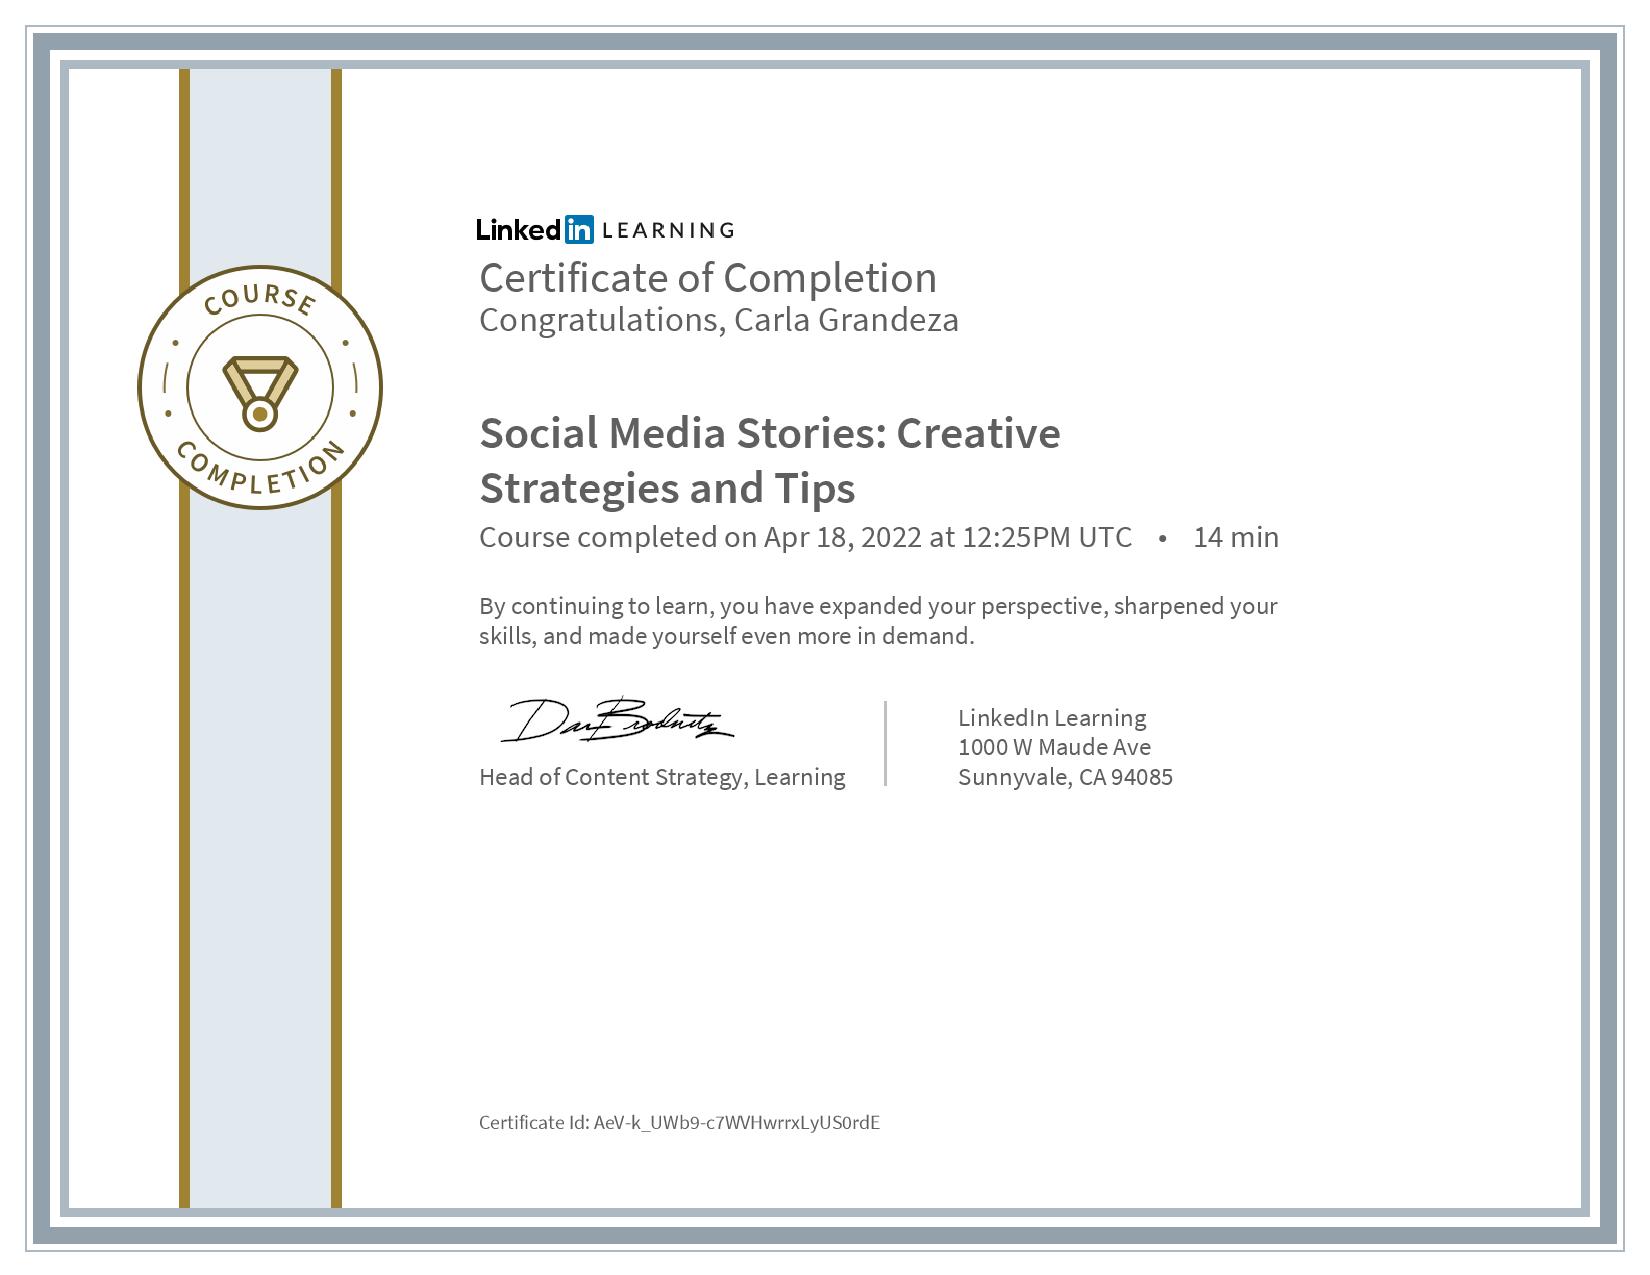 Social Media Stories: Creative Strategies and Tips